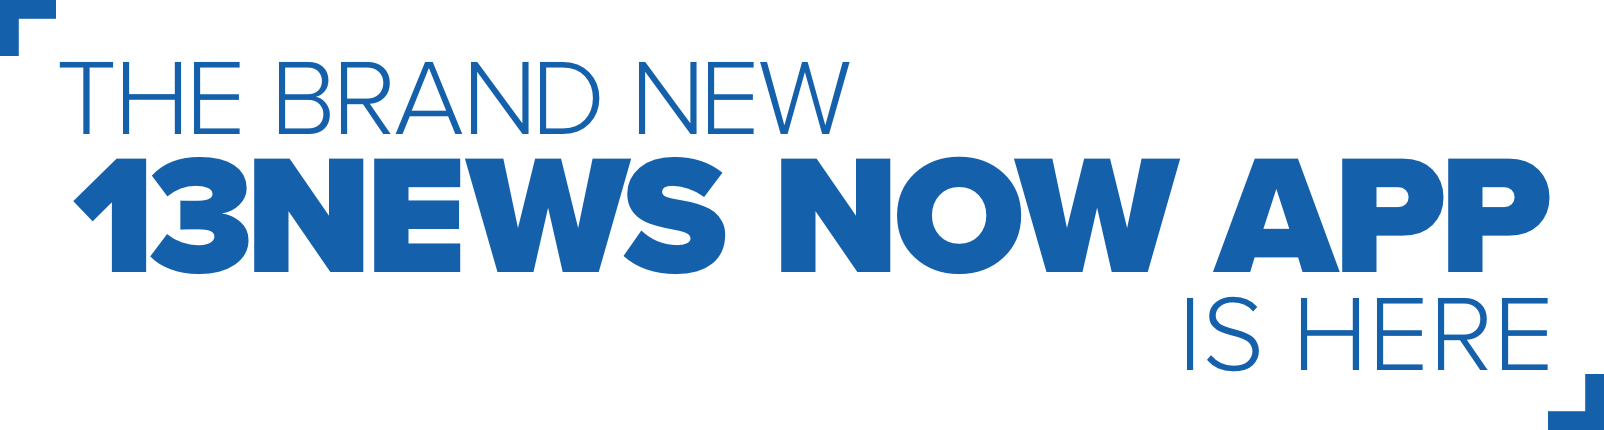 The Brand New 13News Now App is Here